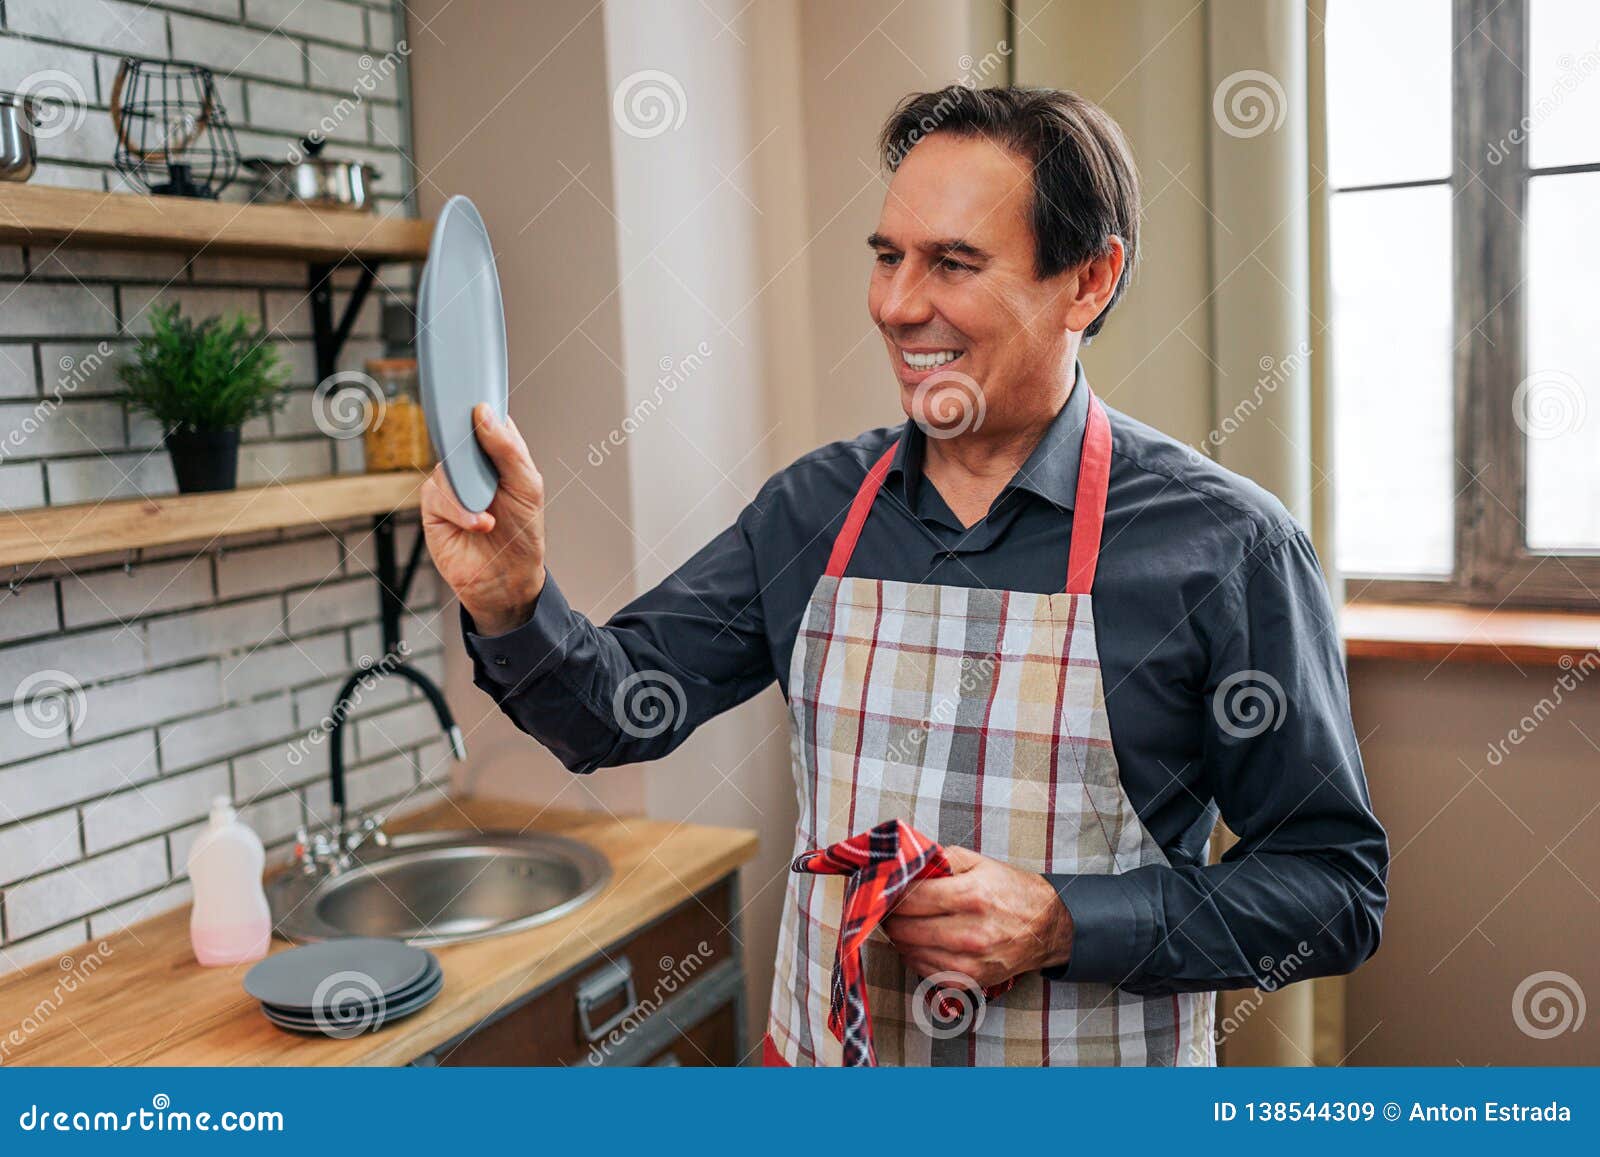 Cheerful Positive Man Stand Alone In Kitchen He Old Plate And